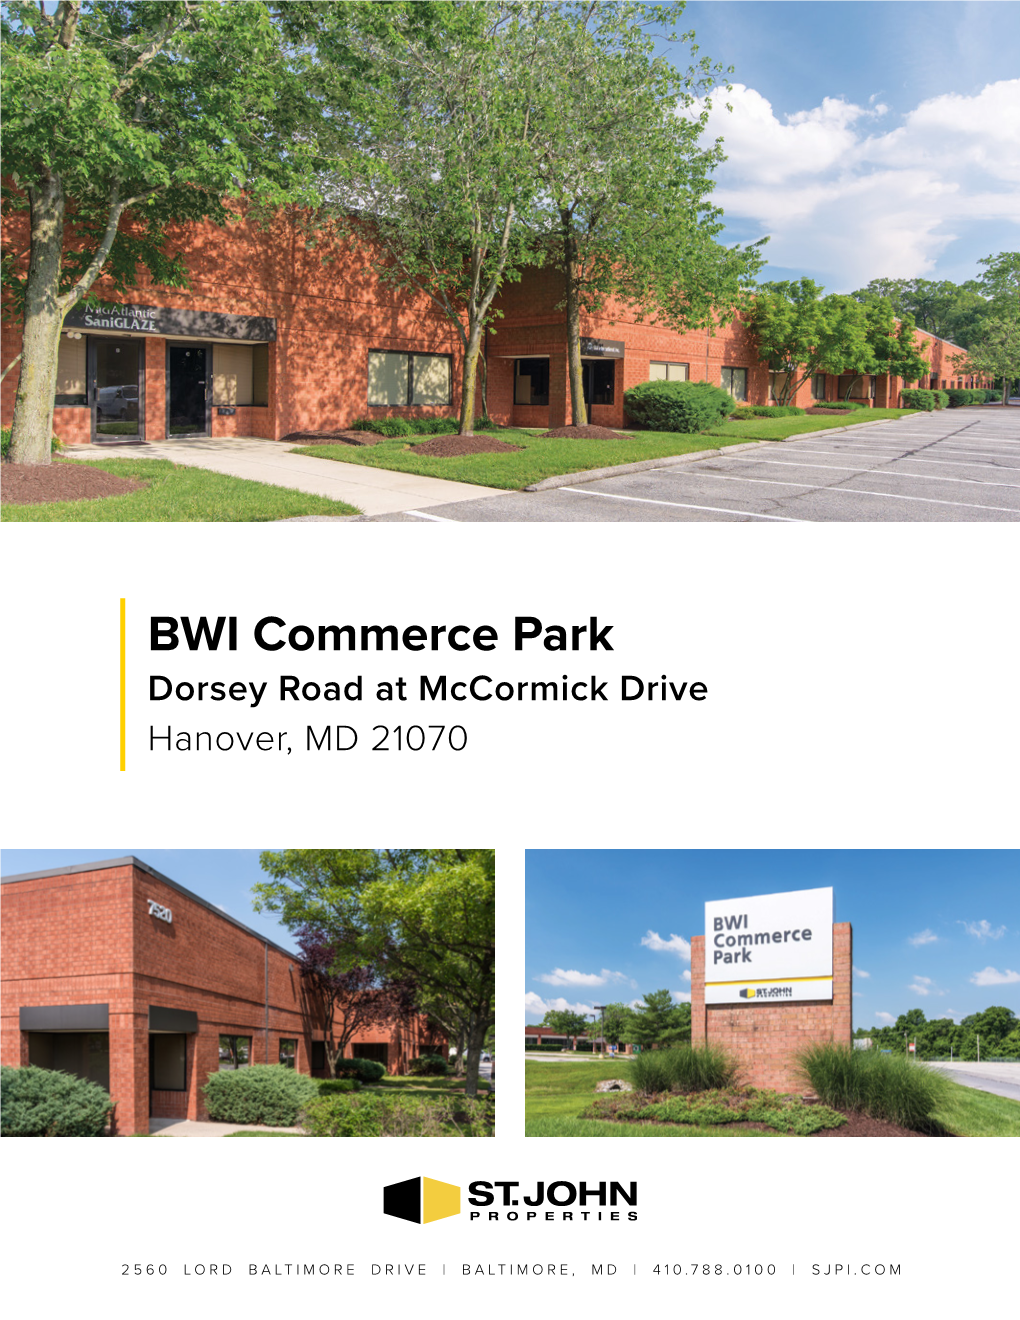 BWI Commerce Park Dorsey Road at Mccormick Drive Hanover, MD 21070